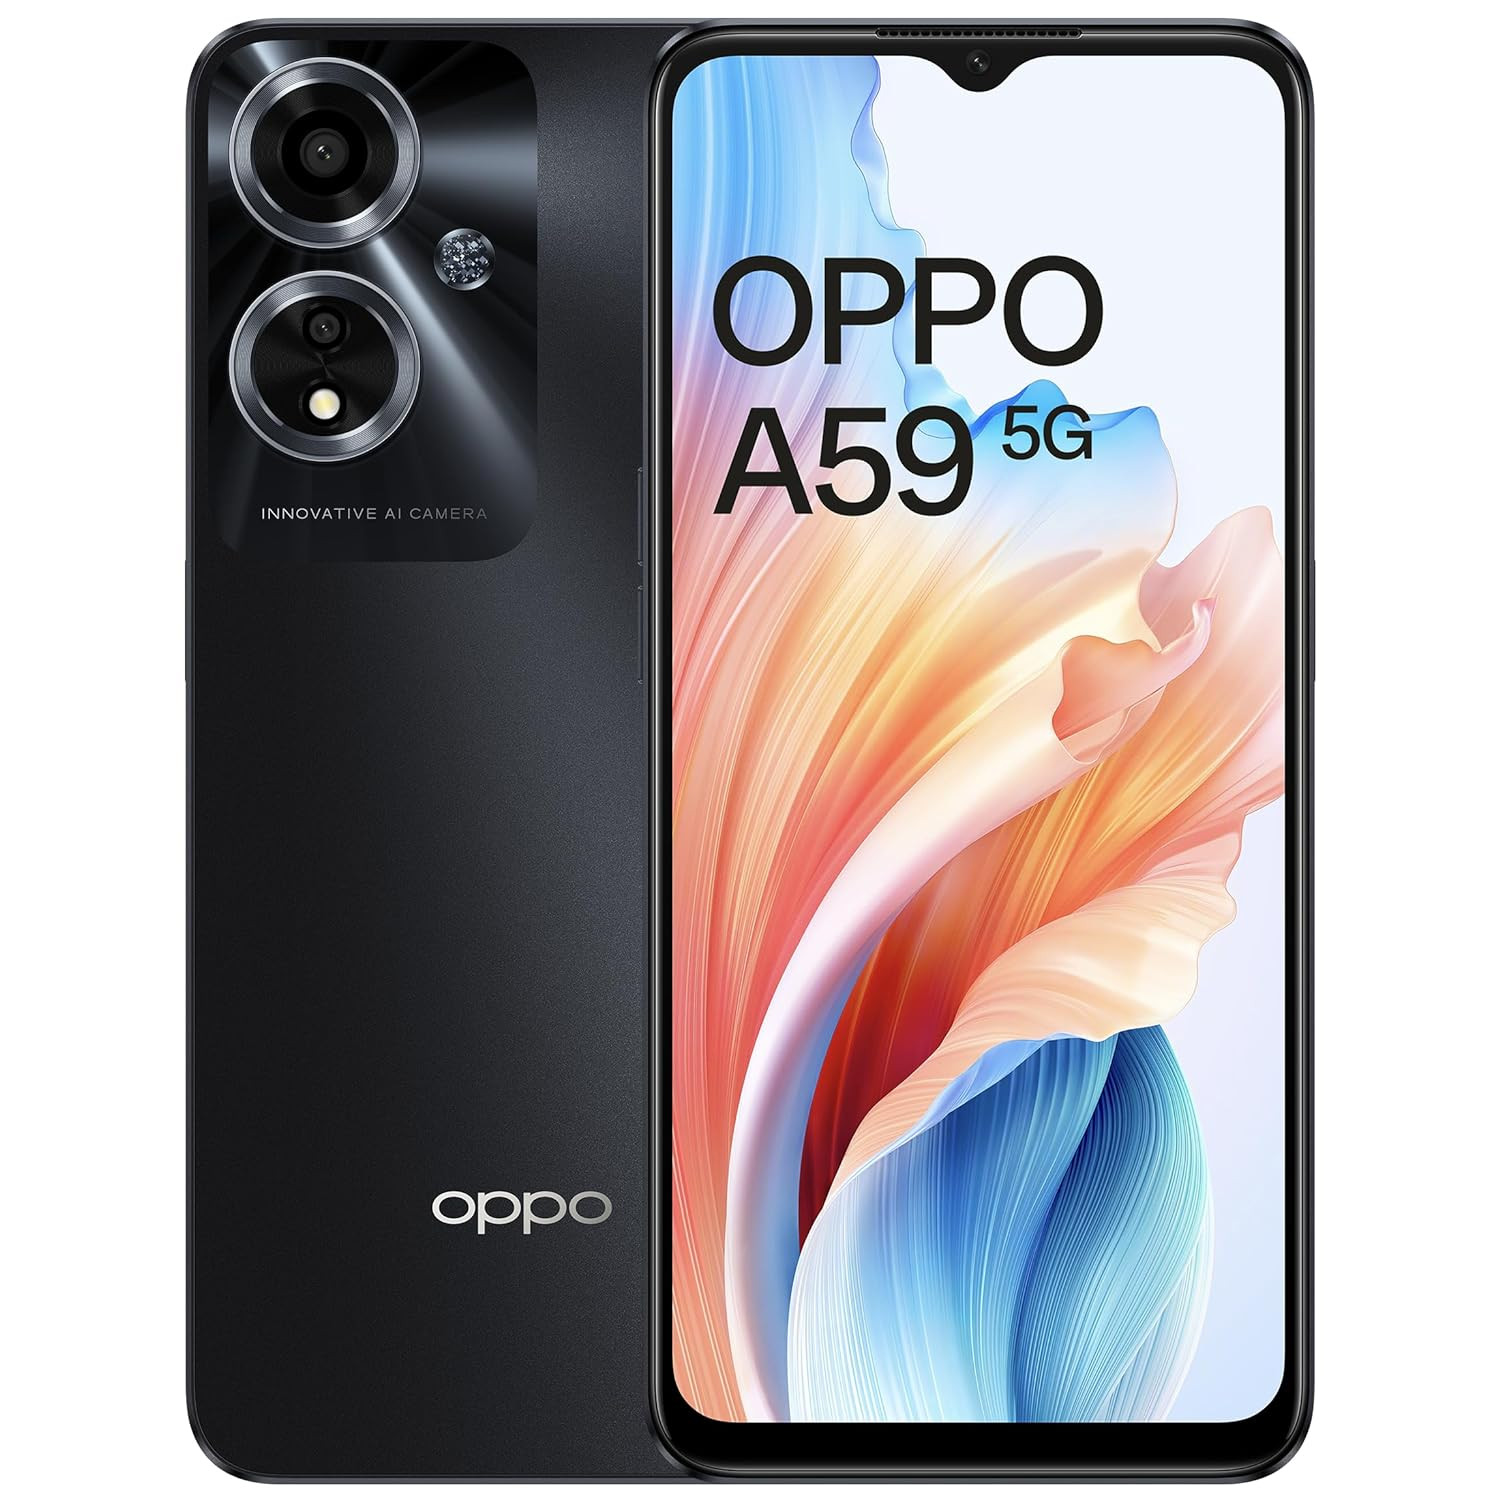 OPPO A59 5G (Starry Black, 4GB RAM, 128GB Storage) | 5000 mAh Battery with 33W SUPERVOOC Charger | 6.56